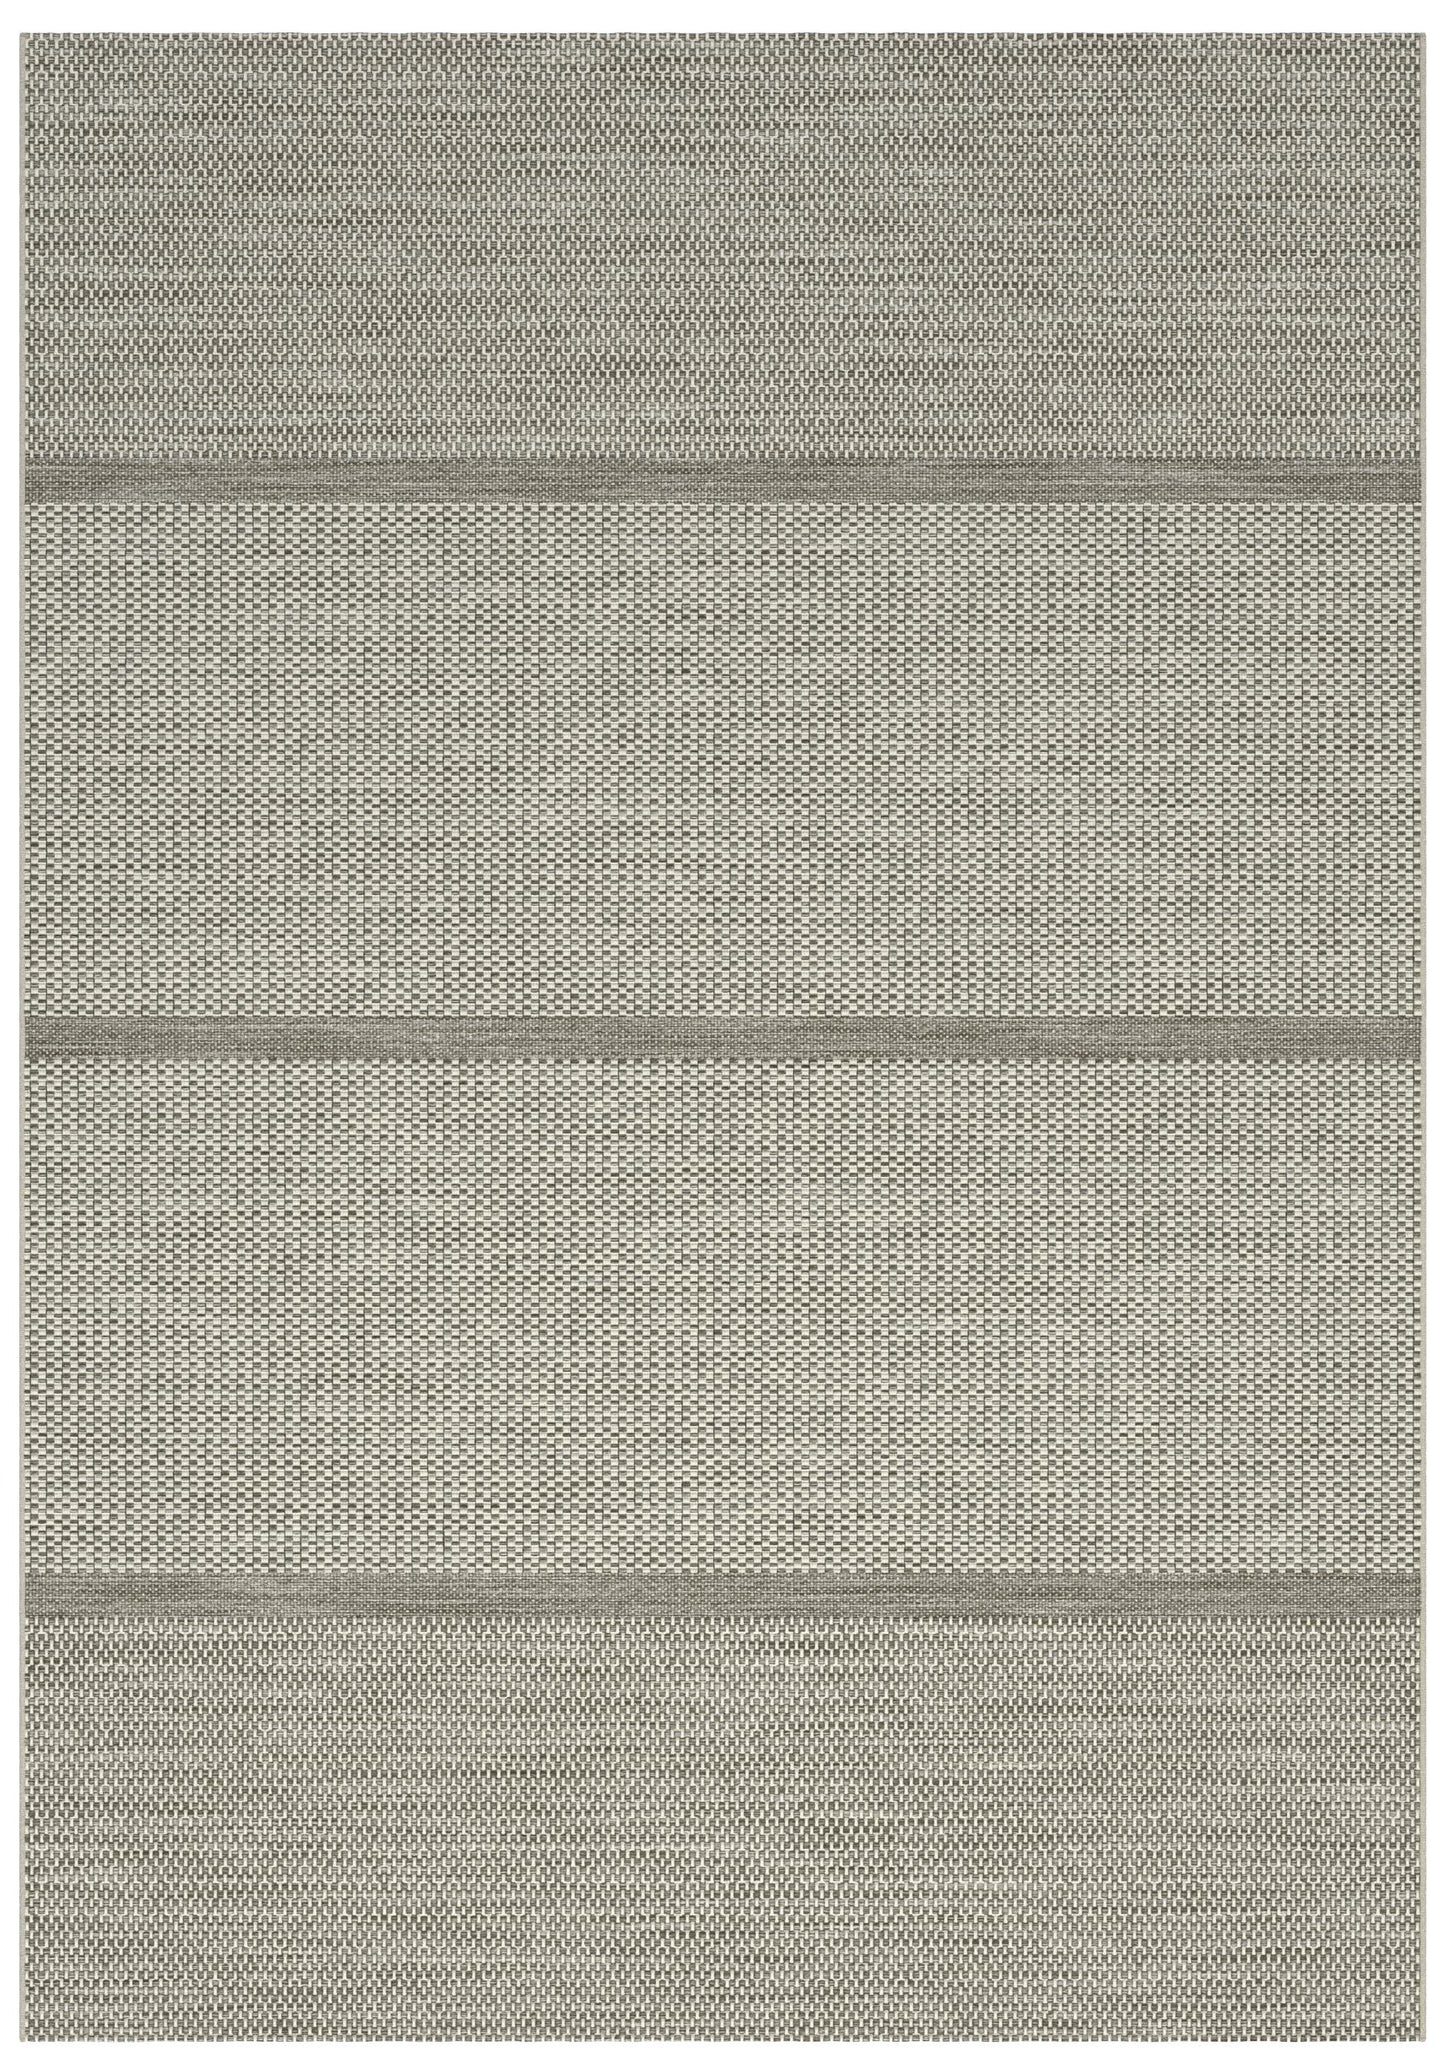 8X10 Area Rug Striped White and Linen Indoor / Outdoor Polypropylene Area Rug 8x10